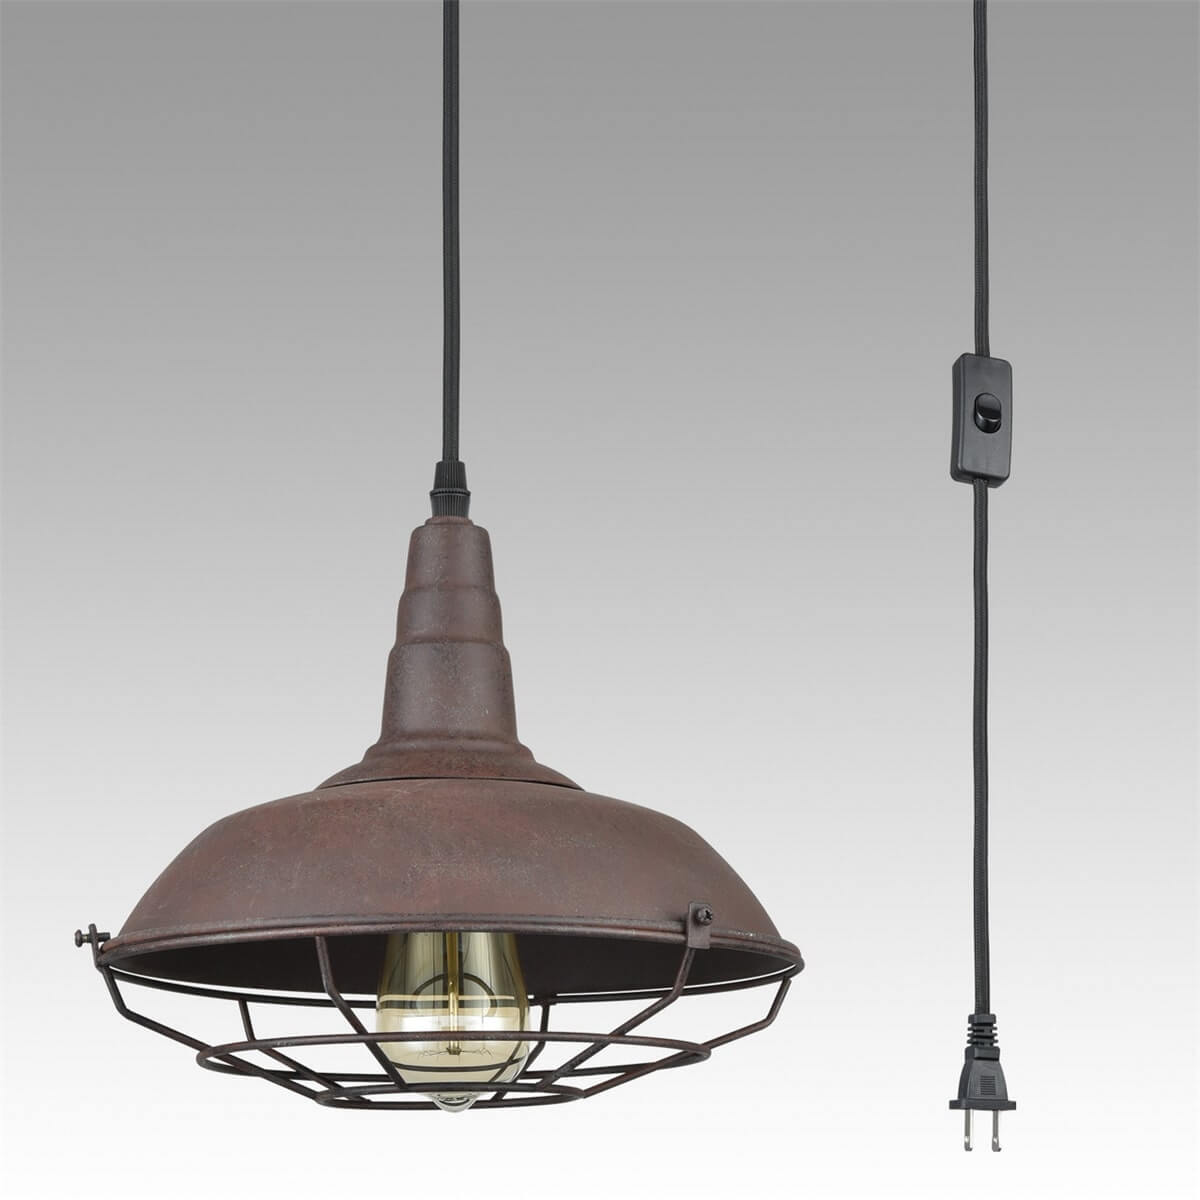 Farmhouse Plug-In Pendant Light with Rust Finish Metal Cage Shade